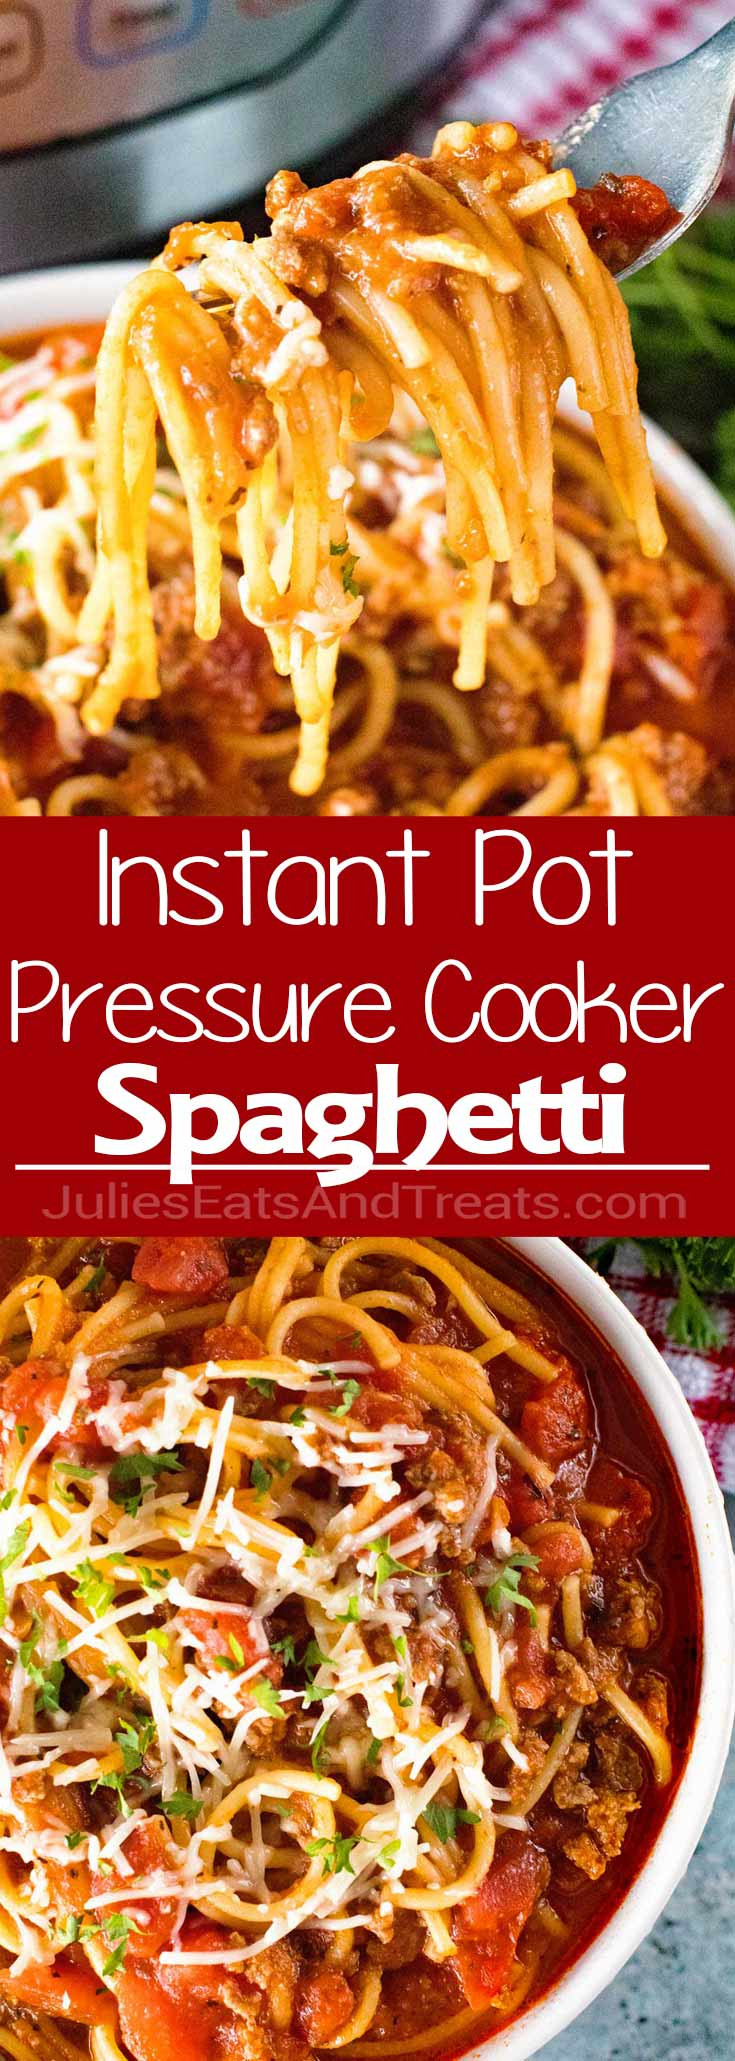 Pressure Cooker Spaghetti And Meat Sauce
 Instant Pot Pressure Cooker Spaghetti Julie s Eats